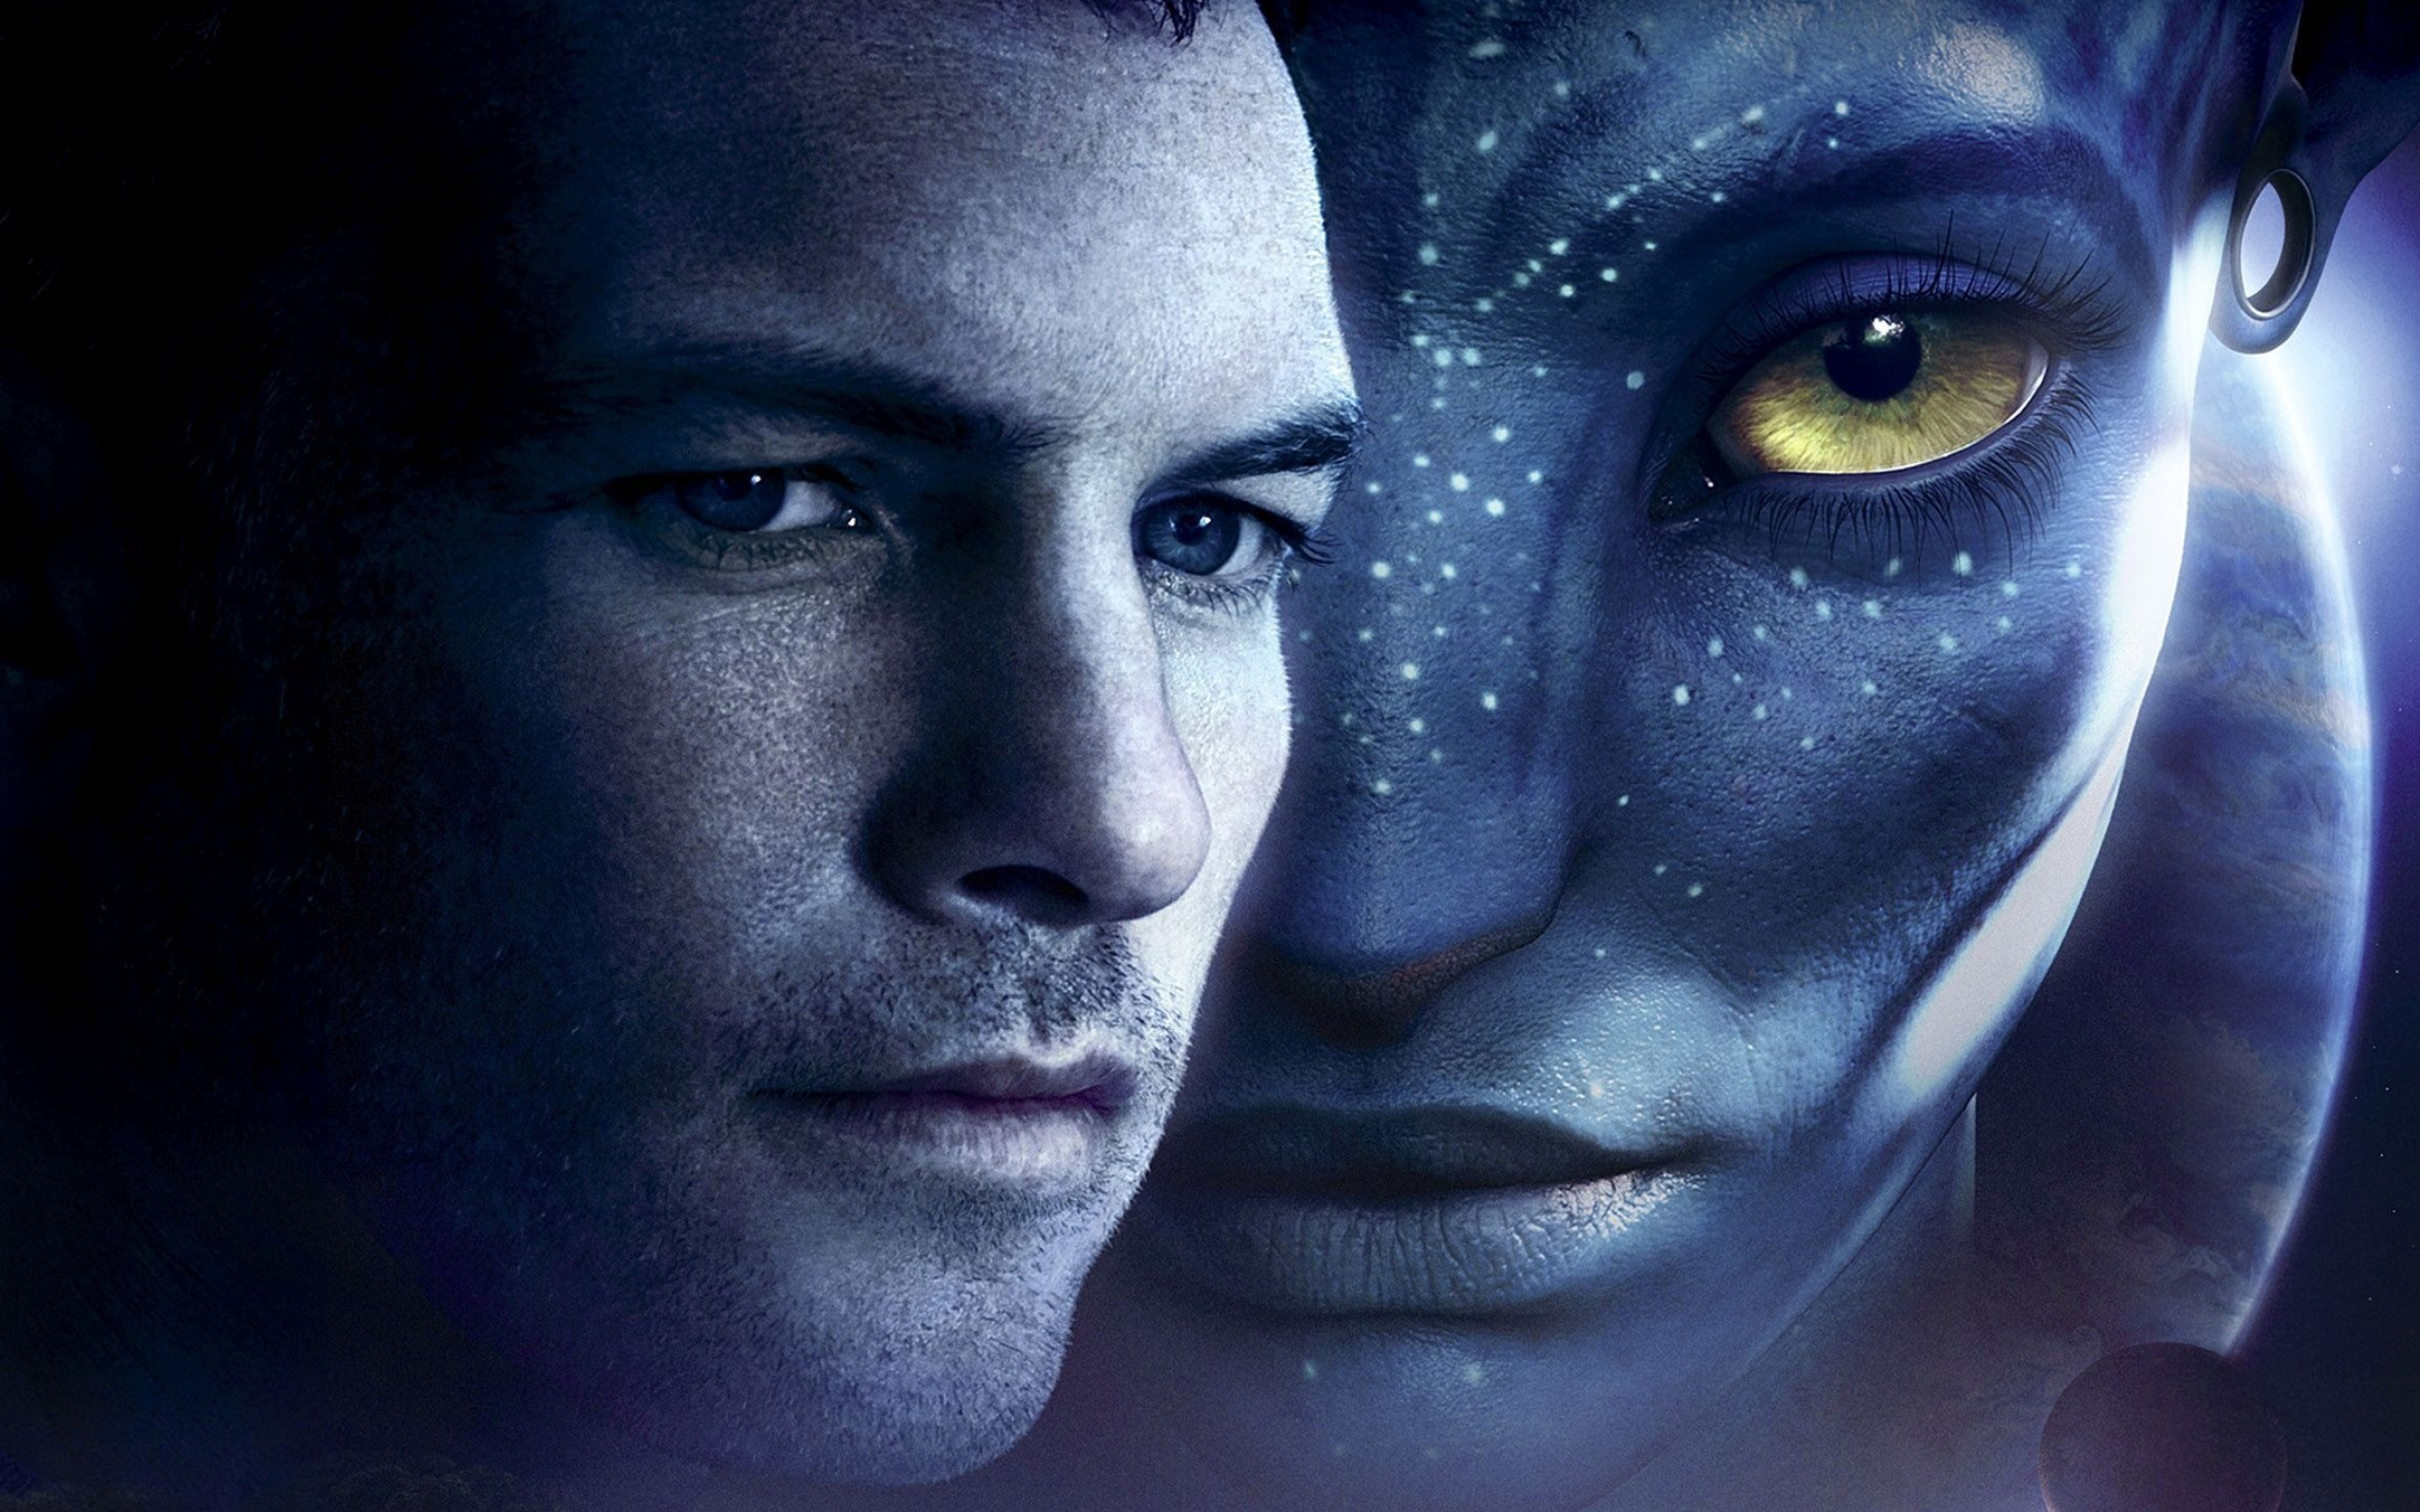 Sam Worthington: Jake Sully, Avatar, 2009, Directed, written, co-produced, and co-edited by James Cameron. 2560x1600 HD Wallpaper.